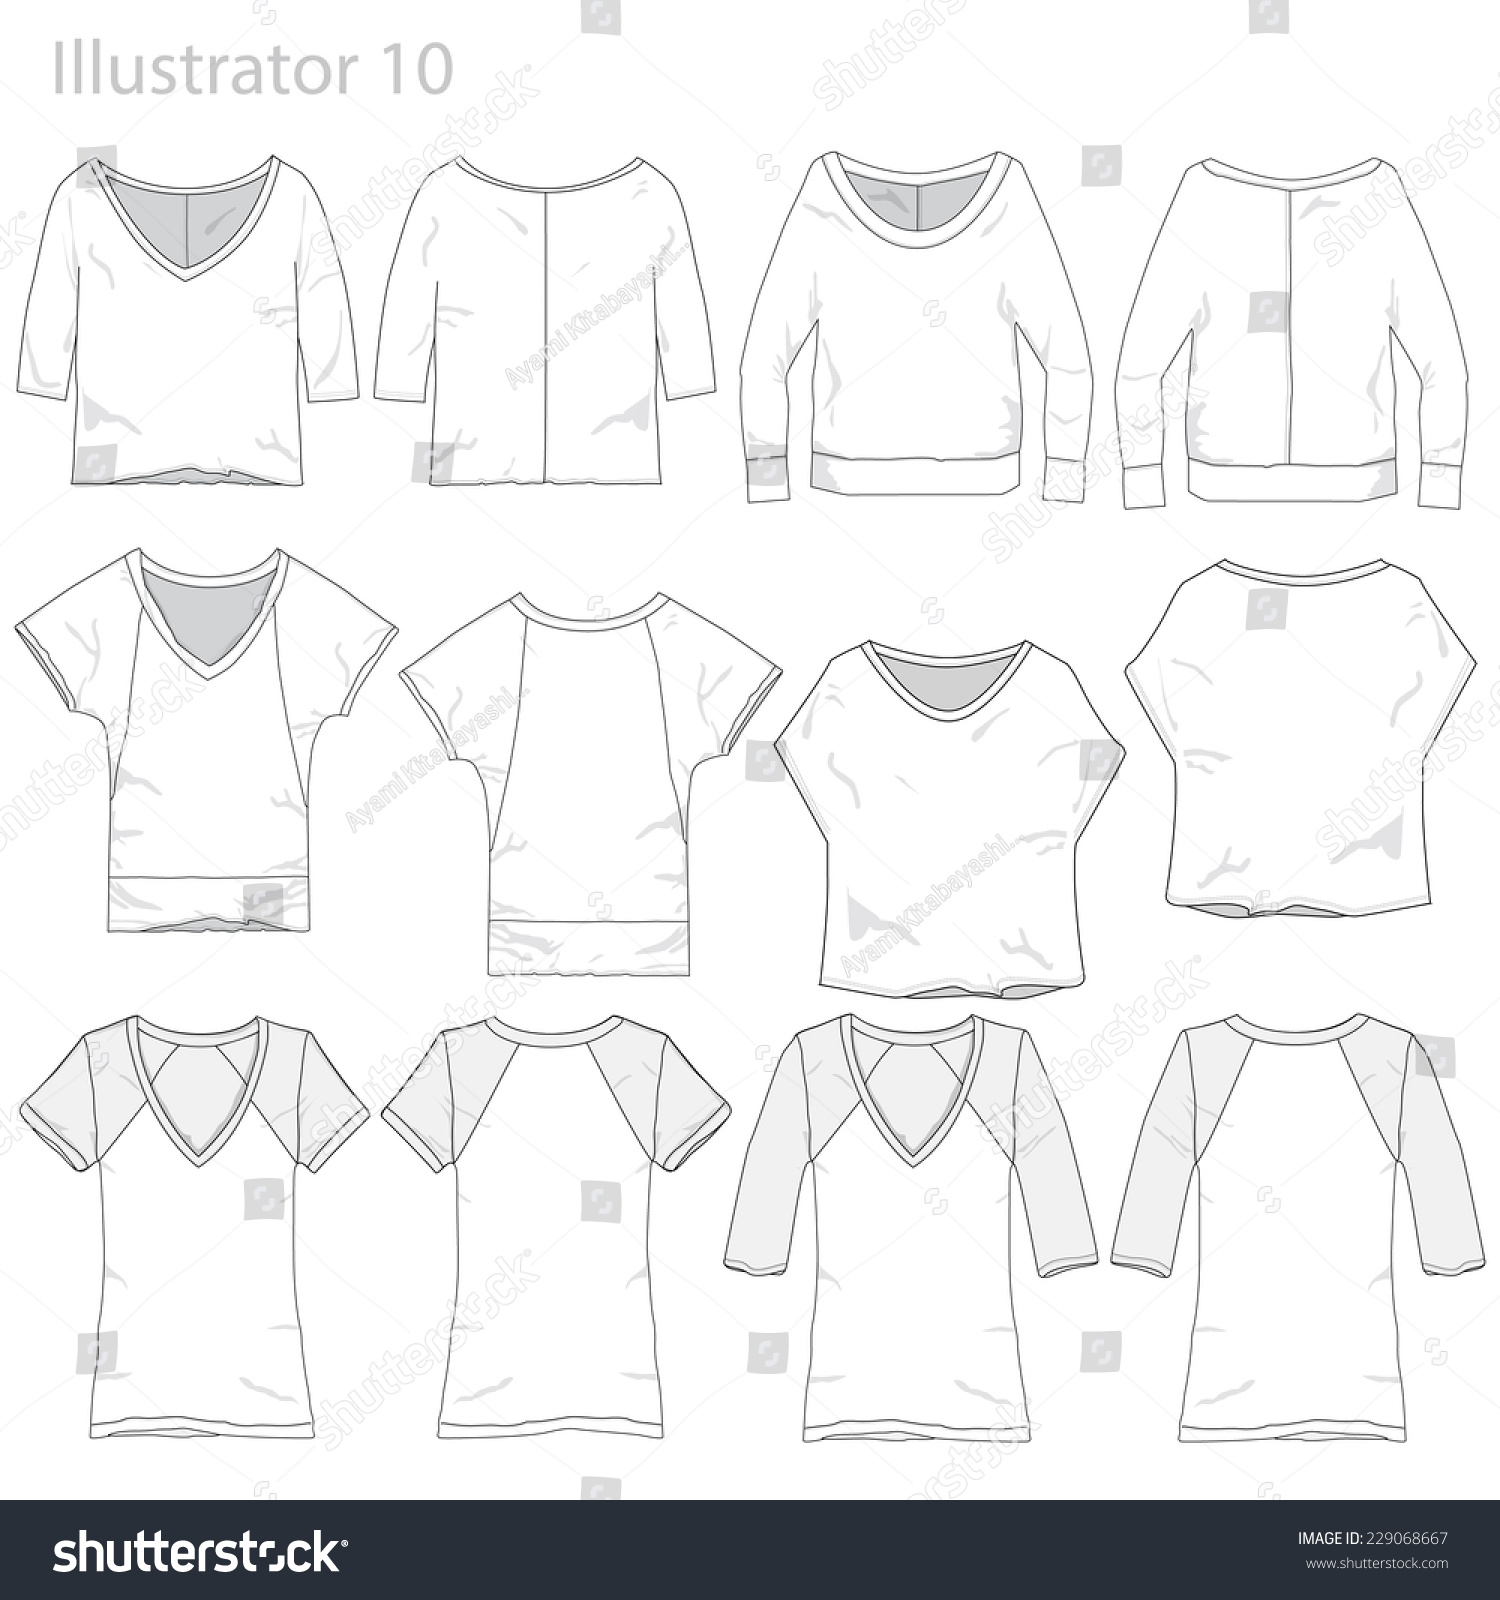 Vector Illustrations Of Various Clothing Garments. - 229068667 ...